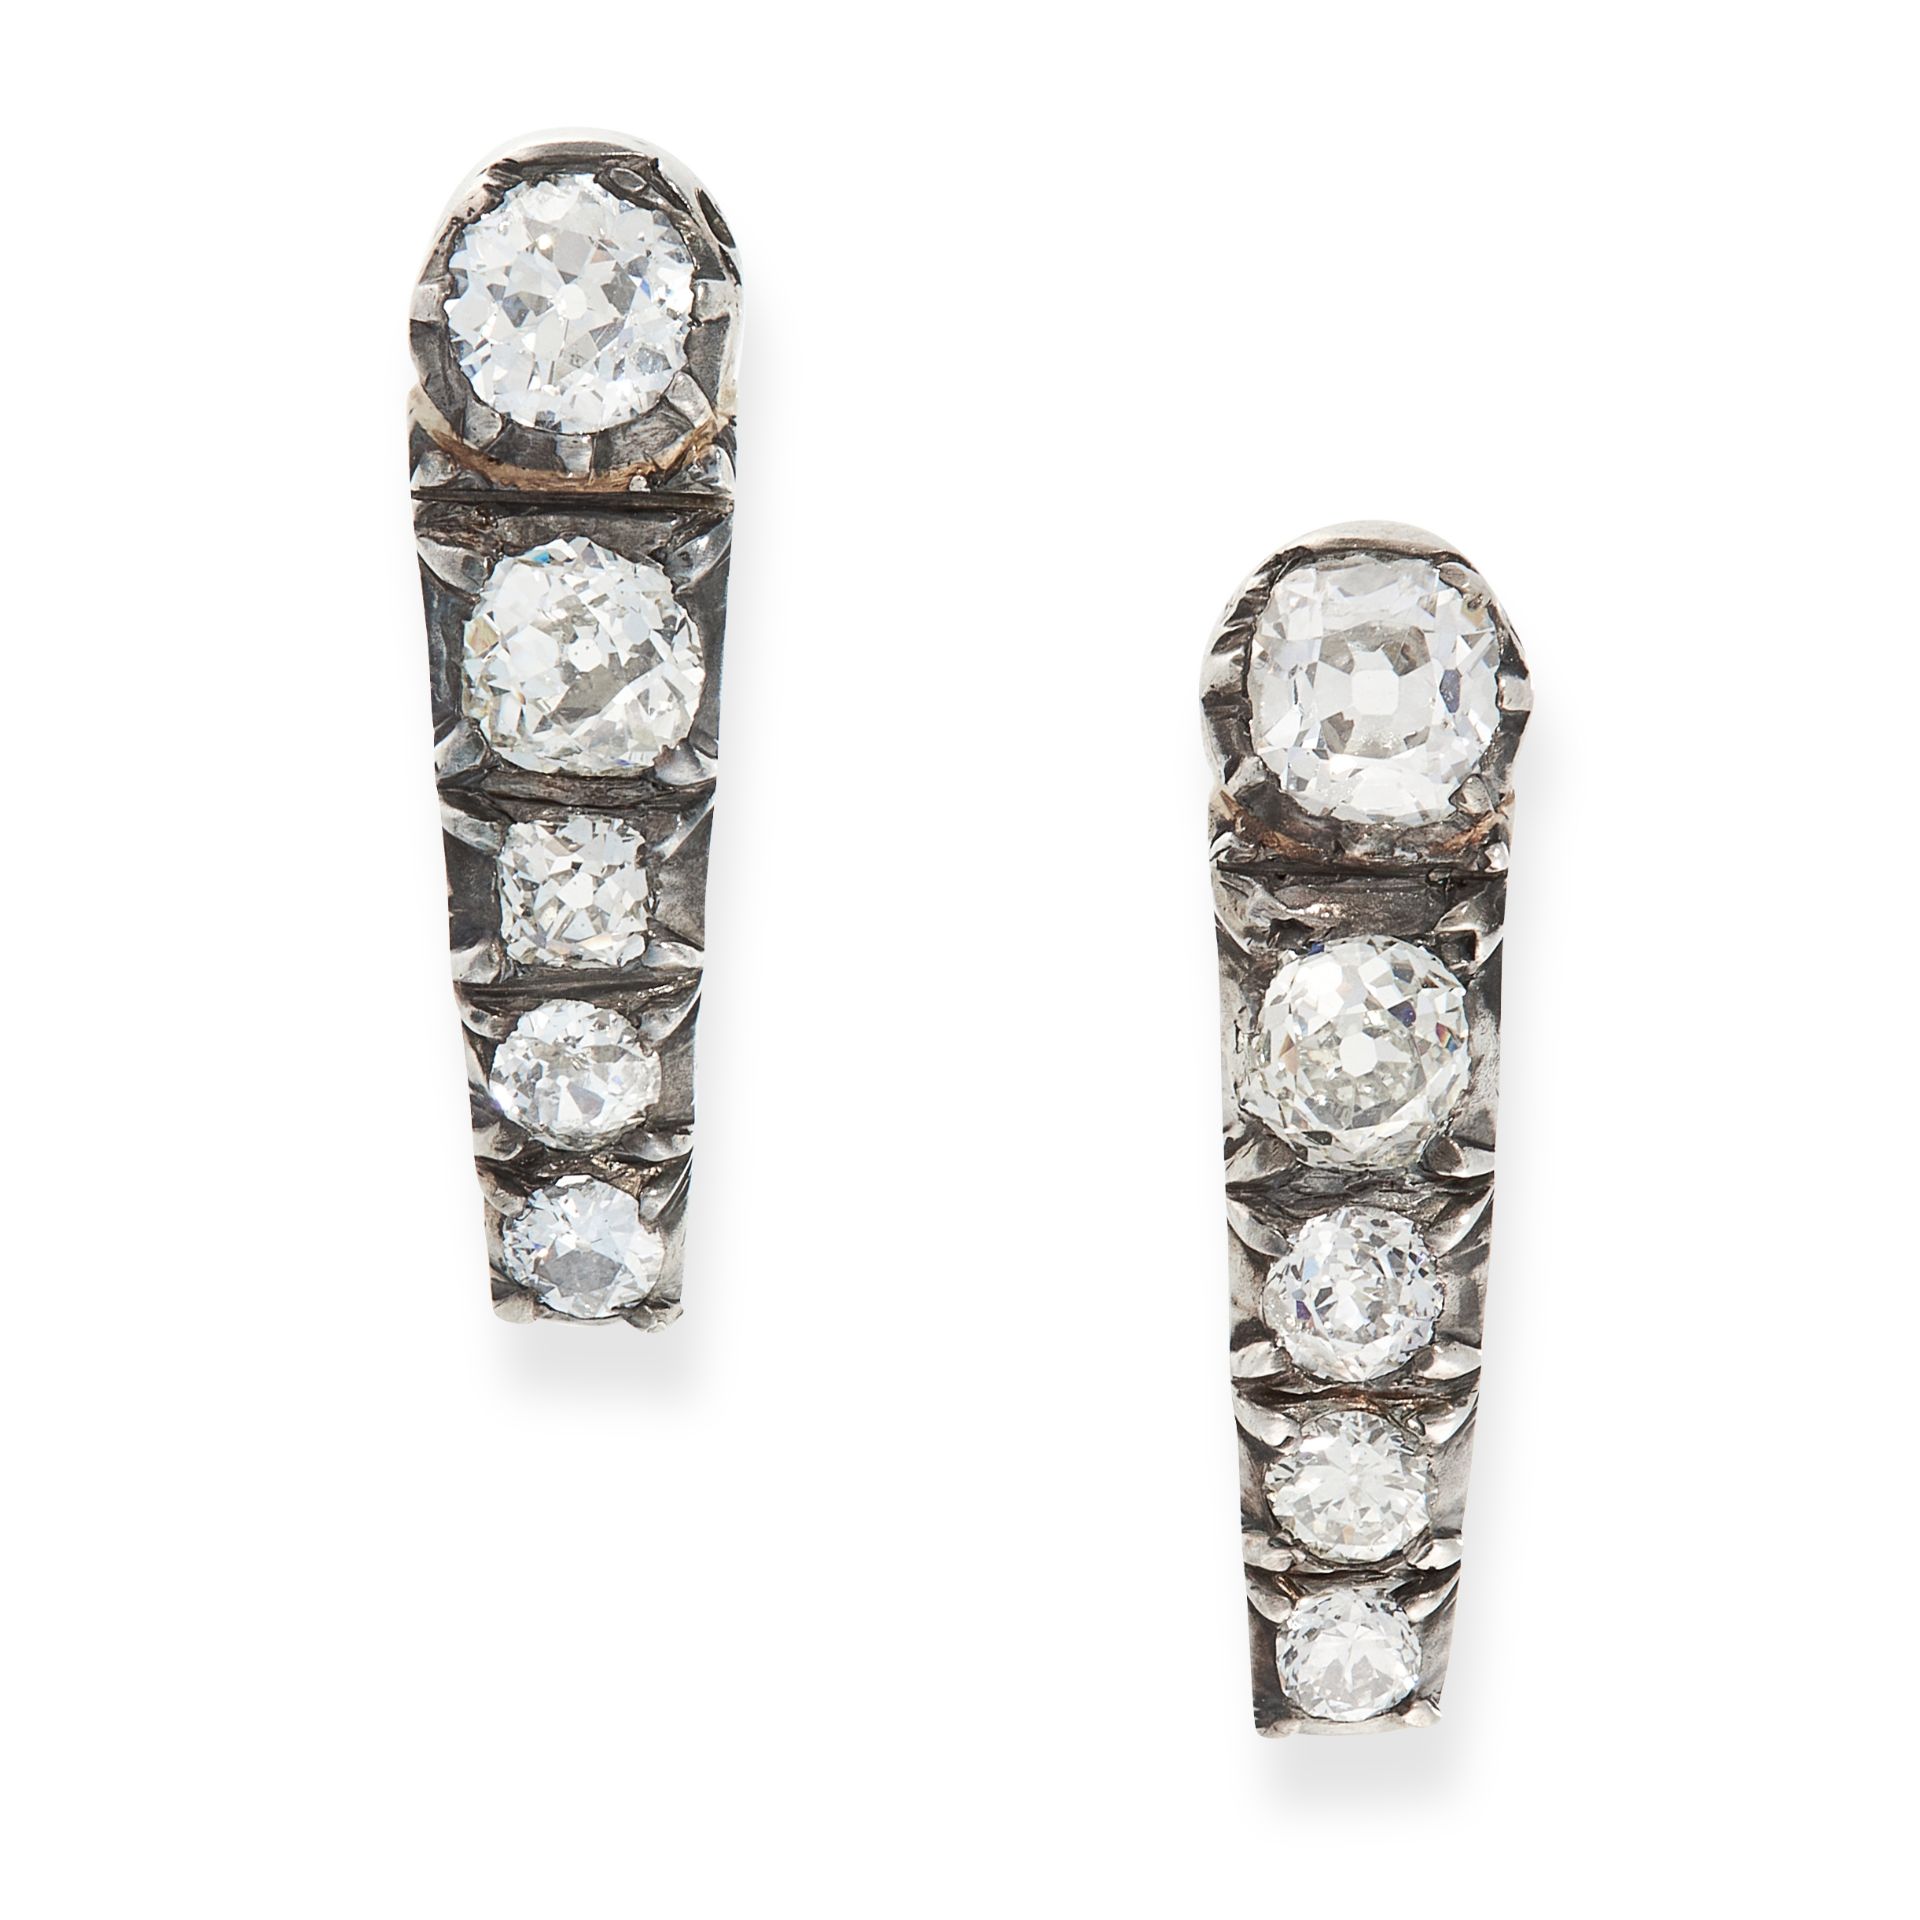 A PAIR OF ANTIQUE DIAMOND EARRINGS in yellow gold and silver, each set with five graduated old cut